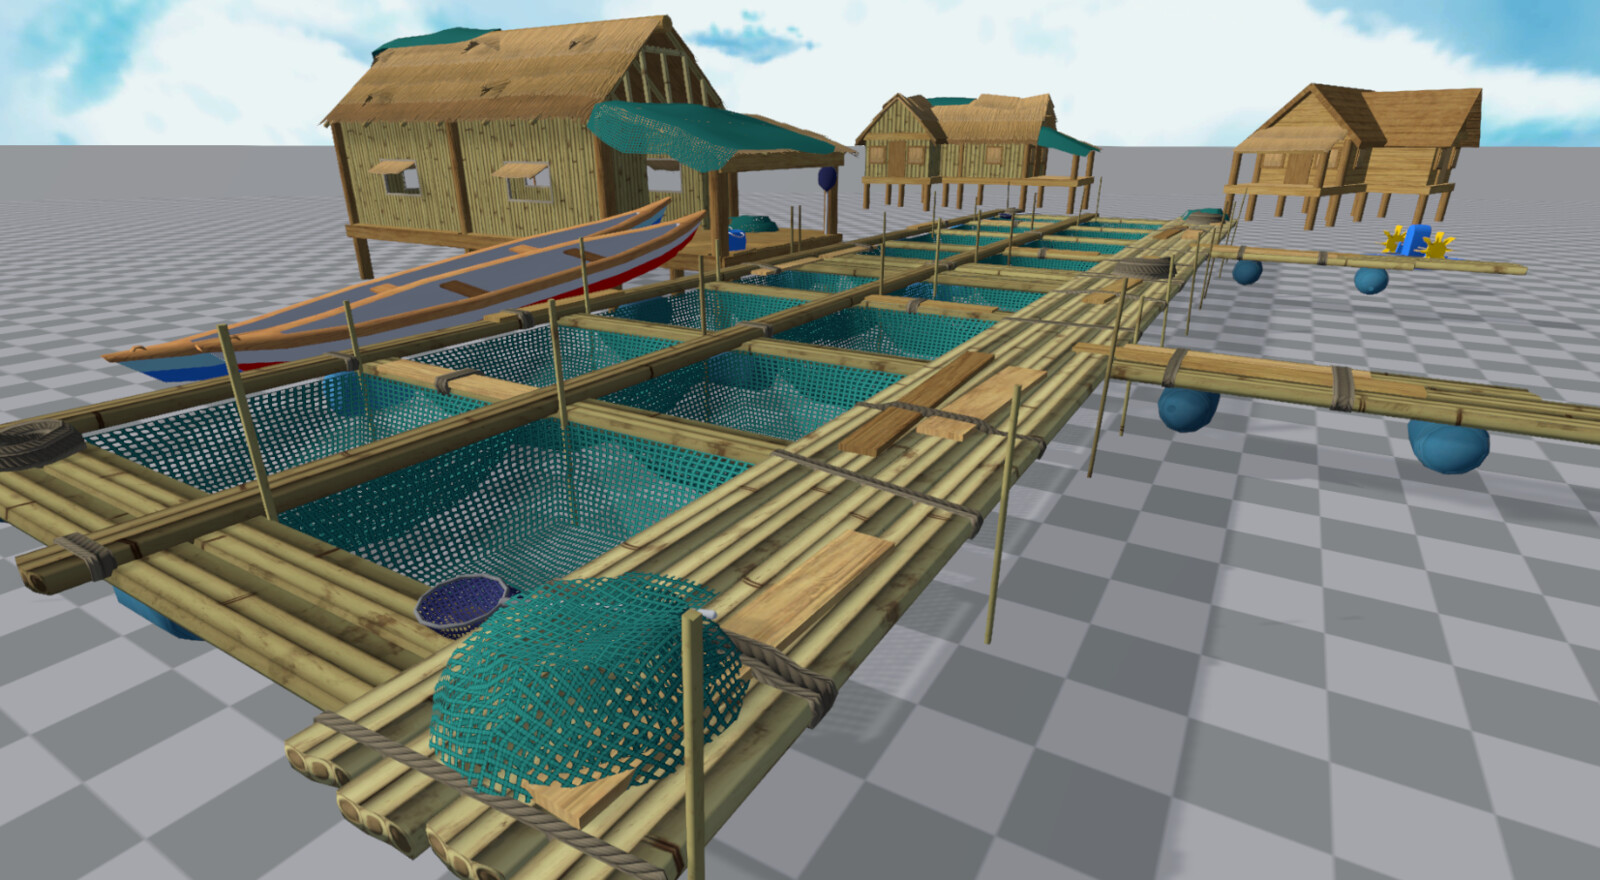 A fishing dock with nets and some more shell buildings in the background.